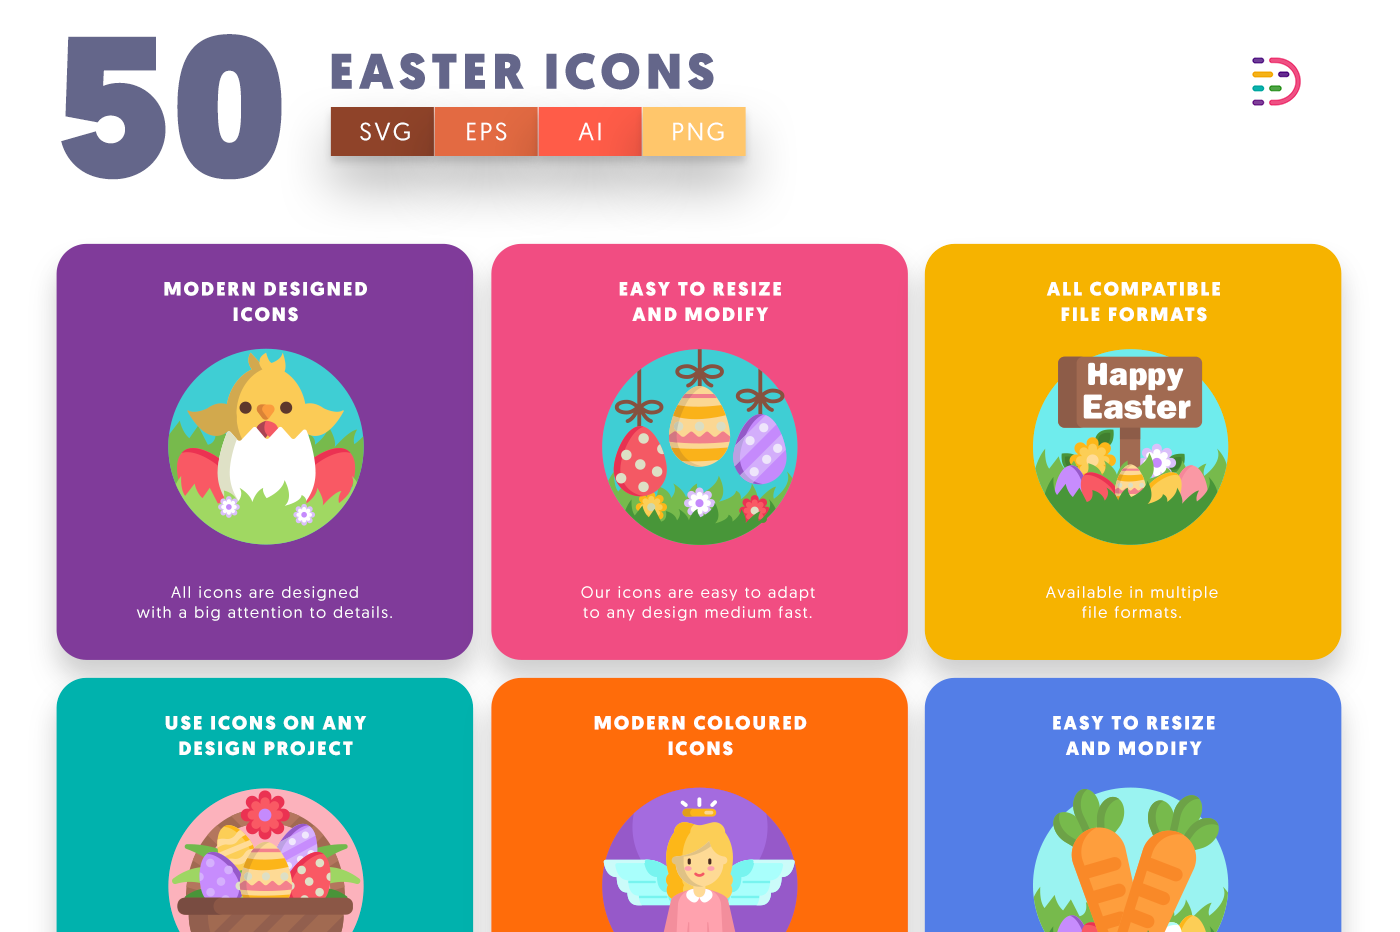 Full vector 50 Easter Icons